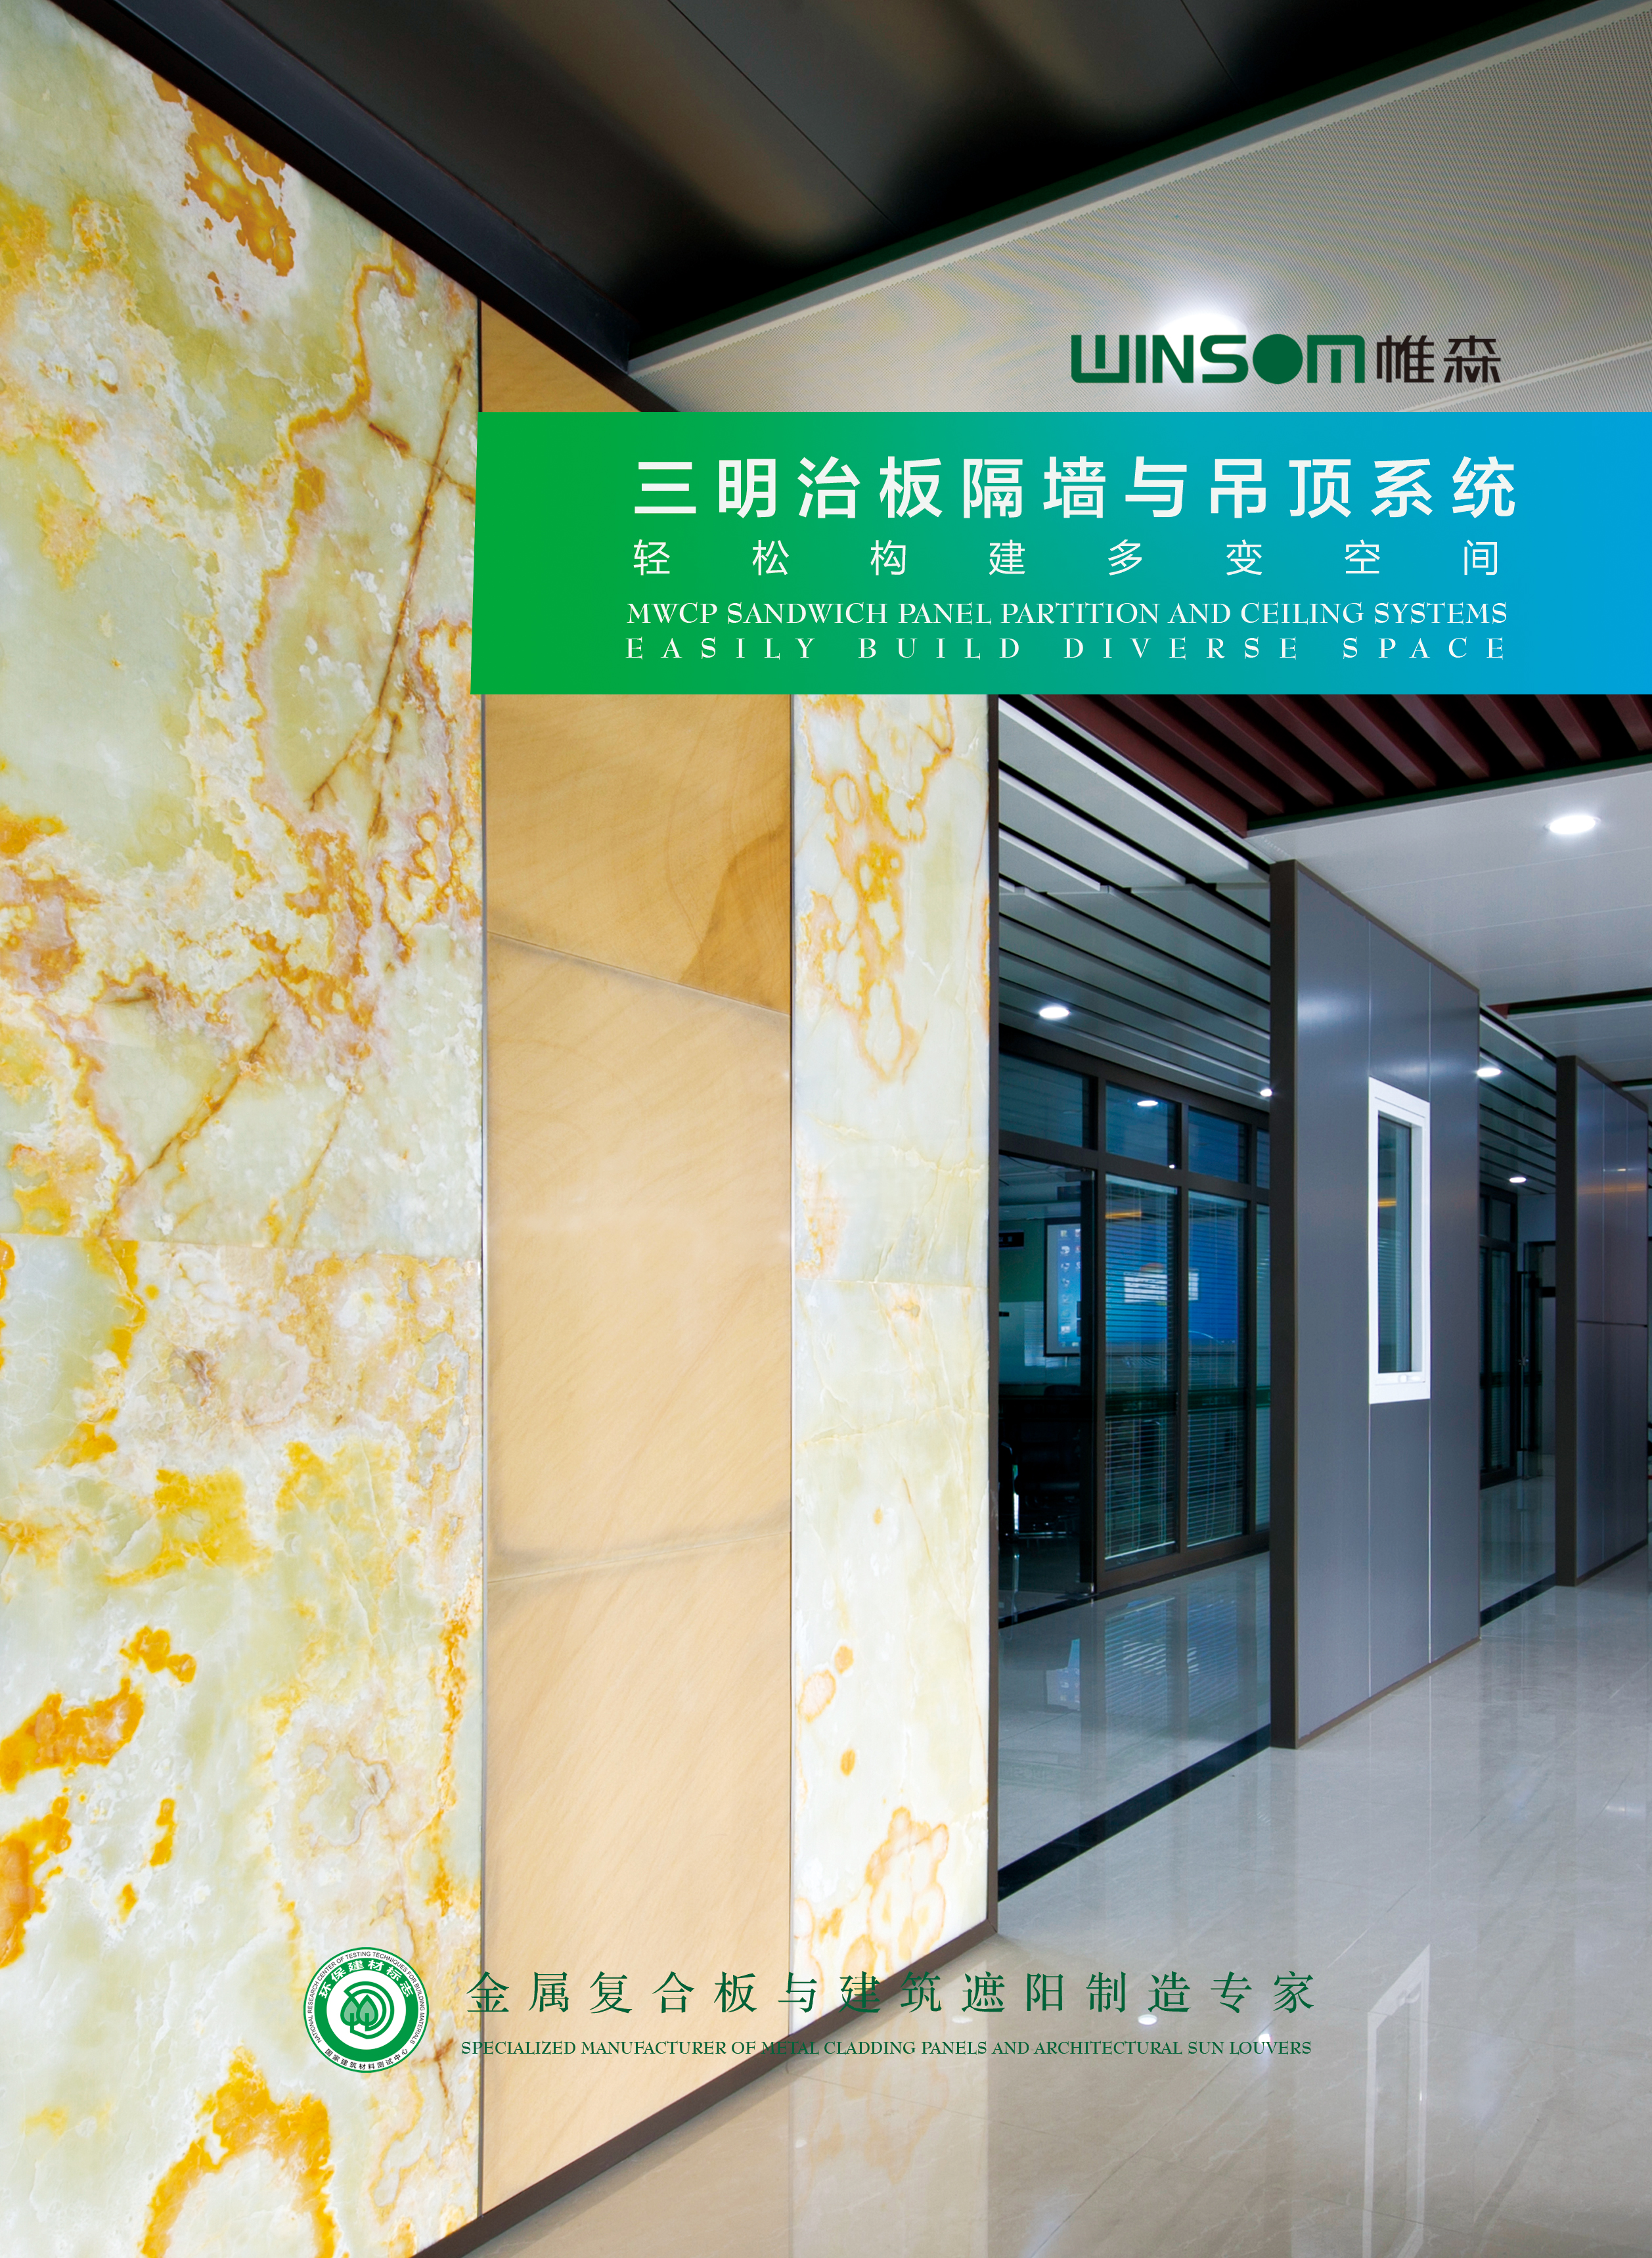 mwcp sandwich panel partition